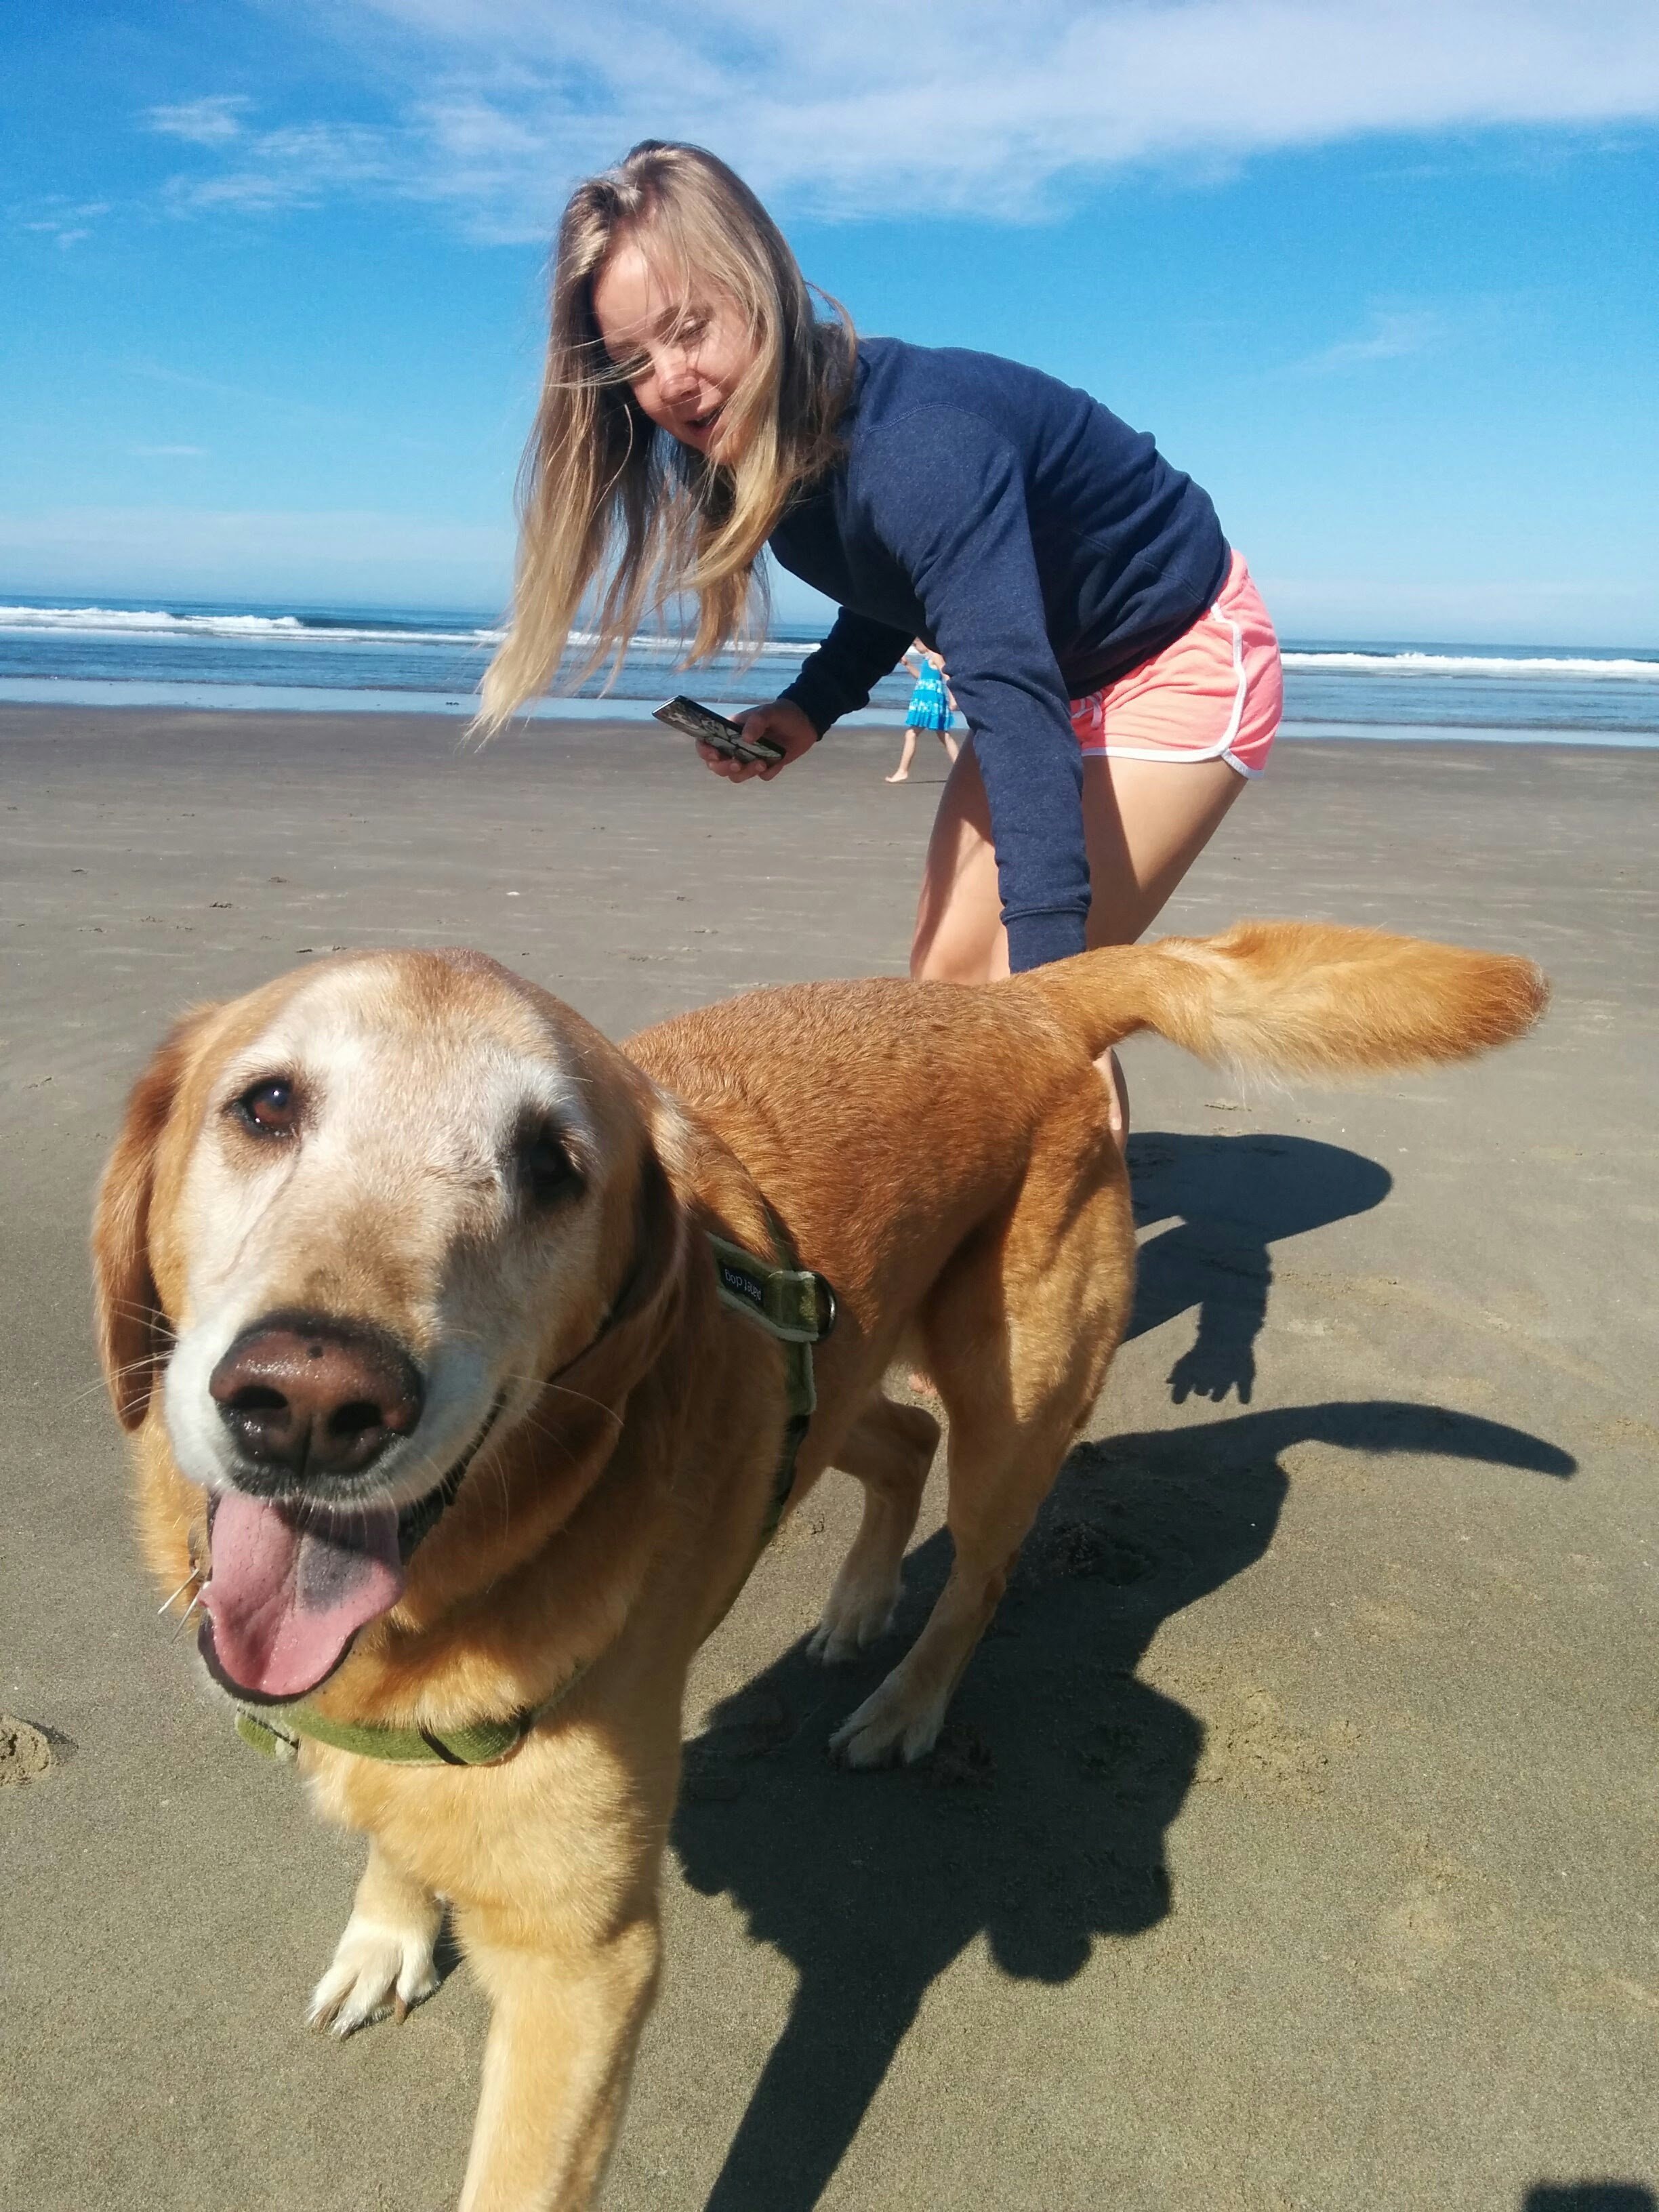 A dog named Dood, a 5-year-old Golden Retriever, was diagnosed with terminal bone cancer on his skull in July, 2015. Instead of leaving the dog at home, Cassidy Williams' father brought Dood to the Oregon Coast to join in Williams' wedding, and his first and last trip to the coast.